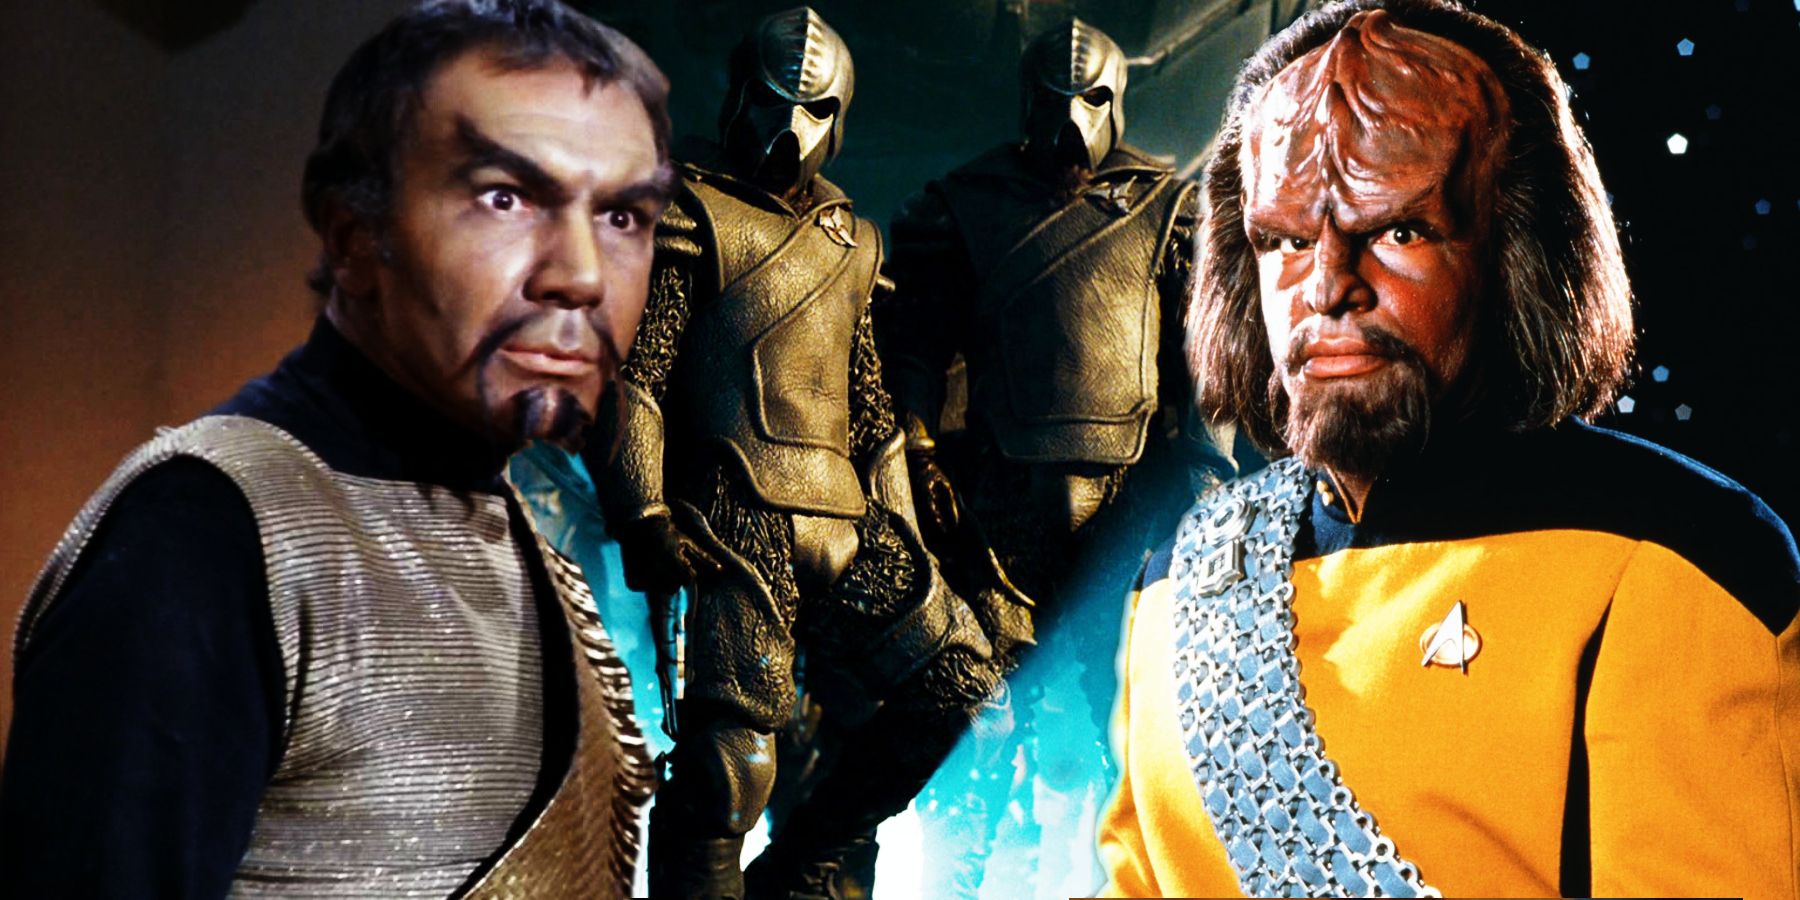 John Collicos as Kor, the Kelvin timeline Klingons, and Michael Dorn as Worf